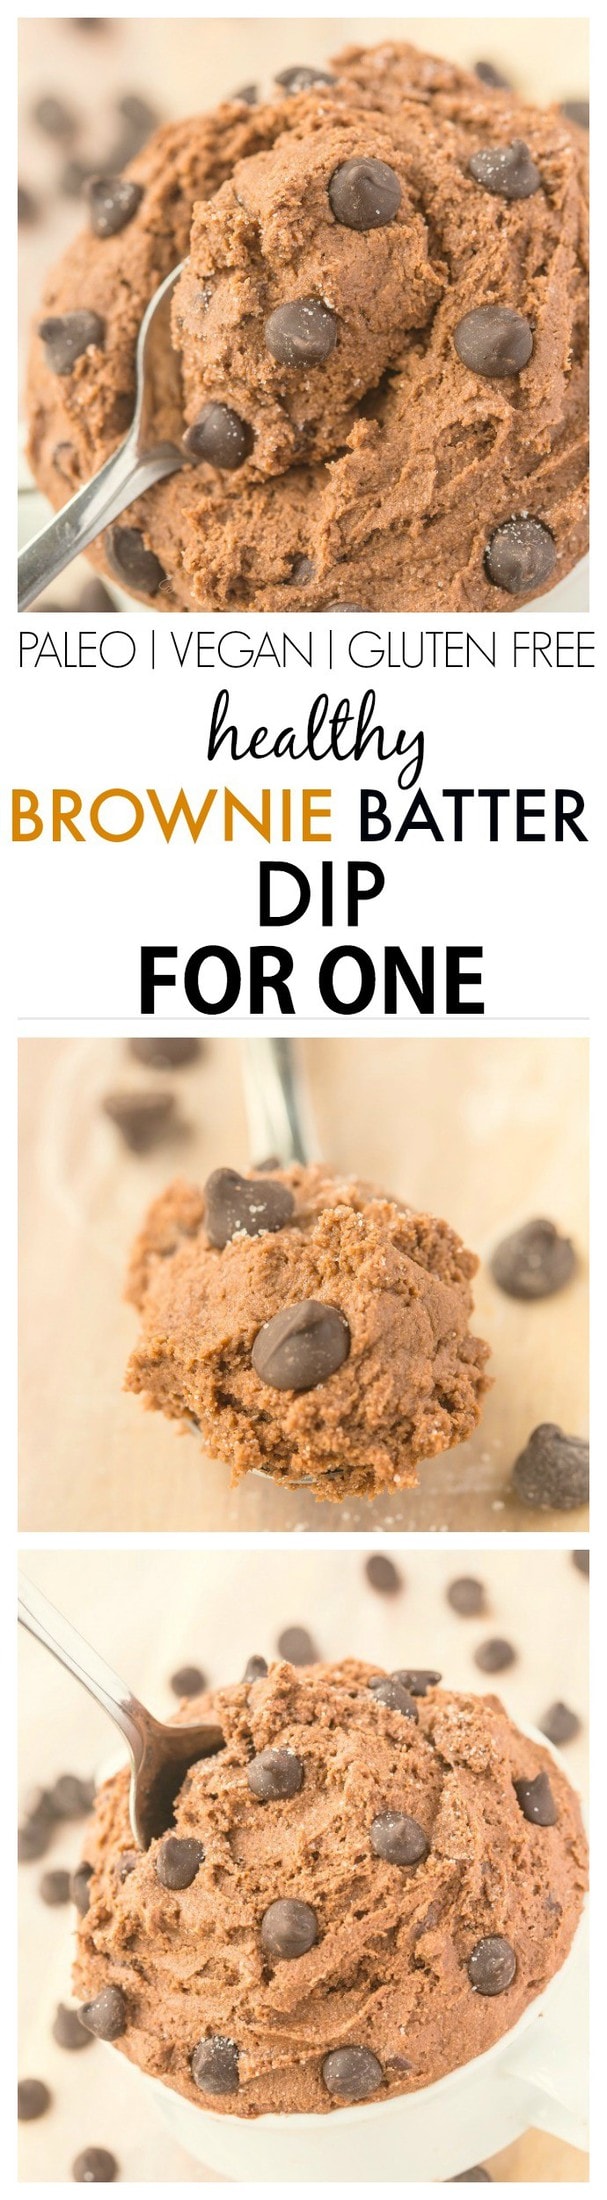 Healthy Brownie Batter Dip for ONE- Smooth, creamy and ready in five minutes, there is NO butter, white flour, sugar or oil but doesn't taste 'healthy'! {vegan, gluten free, paleo, high protein recipe}-